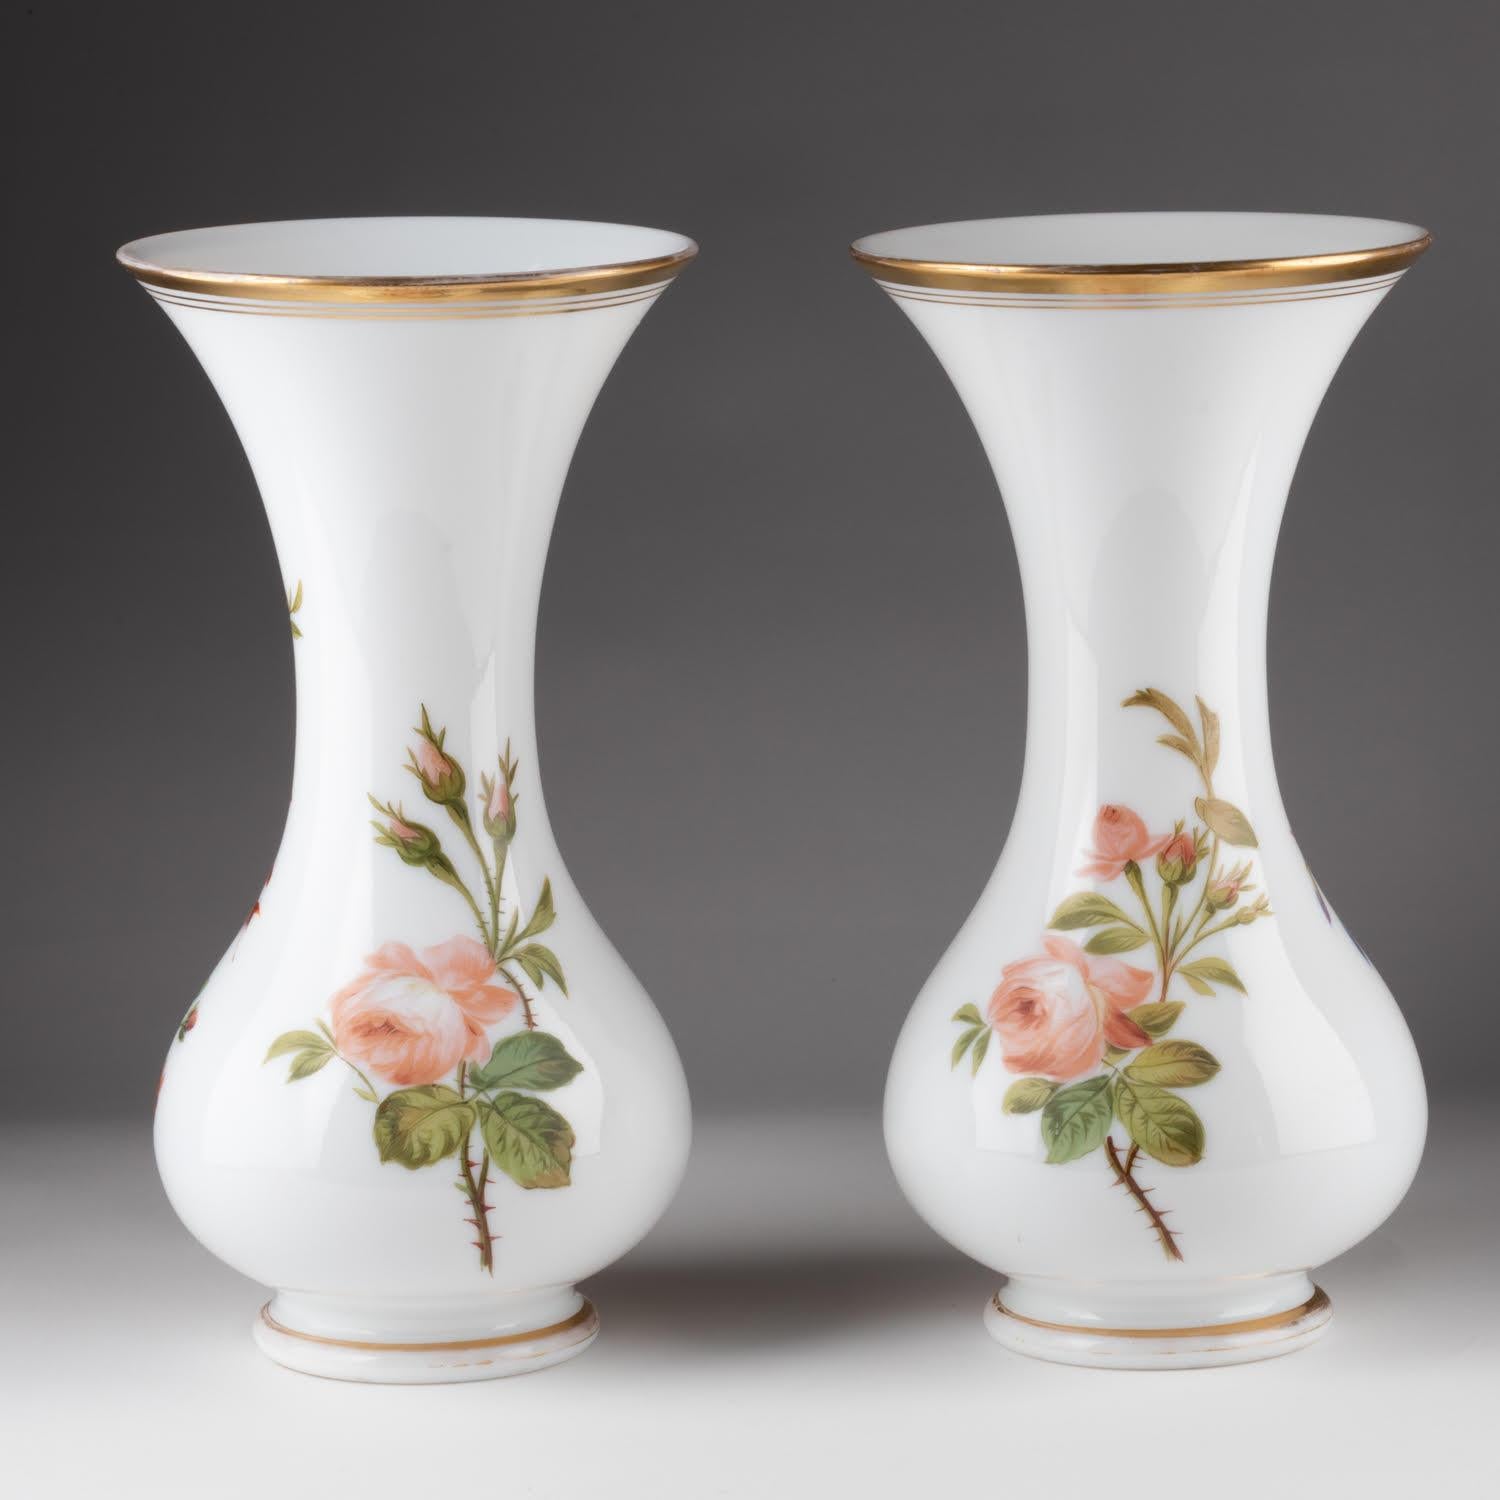 Pair of Opaline Vases Painted with Floral Motifs, 19th Century. For Sale 2